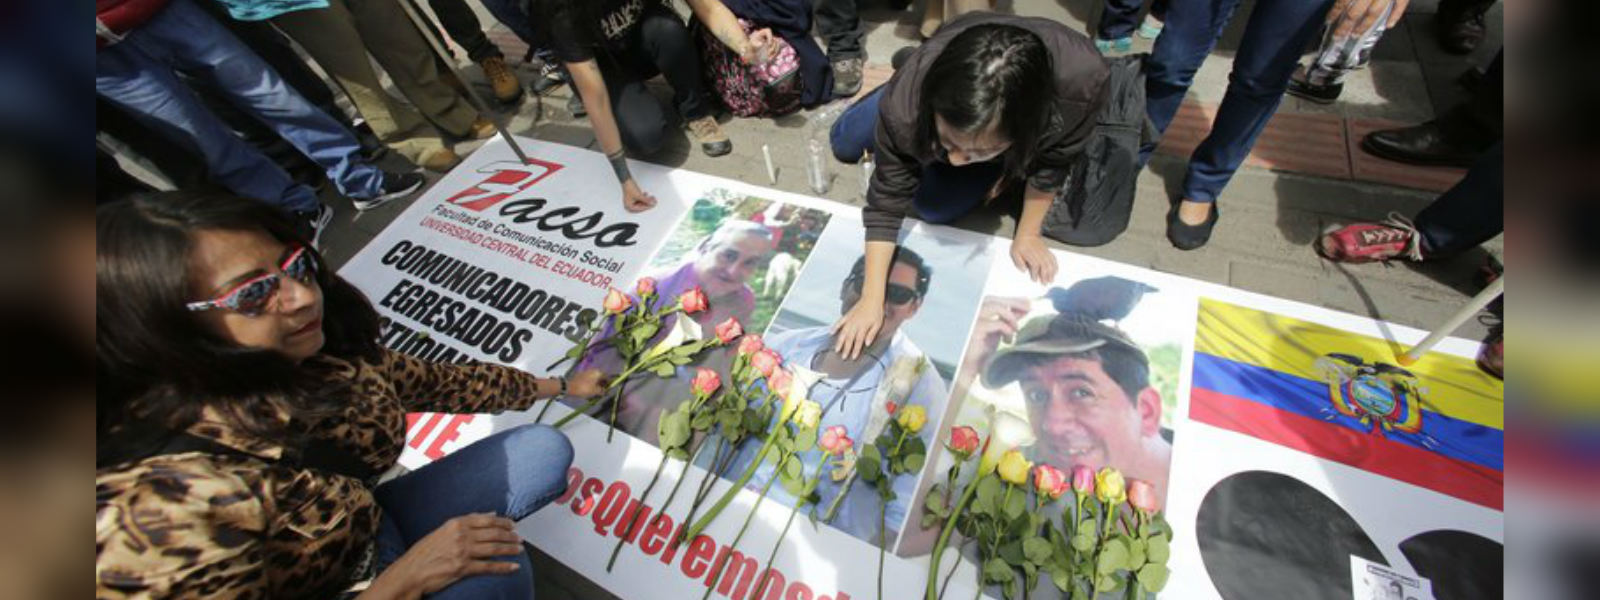 Remains of two Ecuadorean journalists discovered